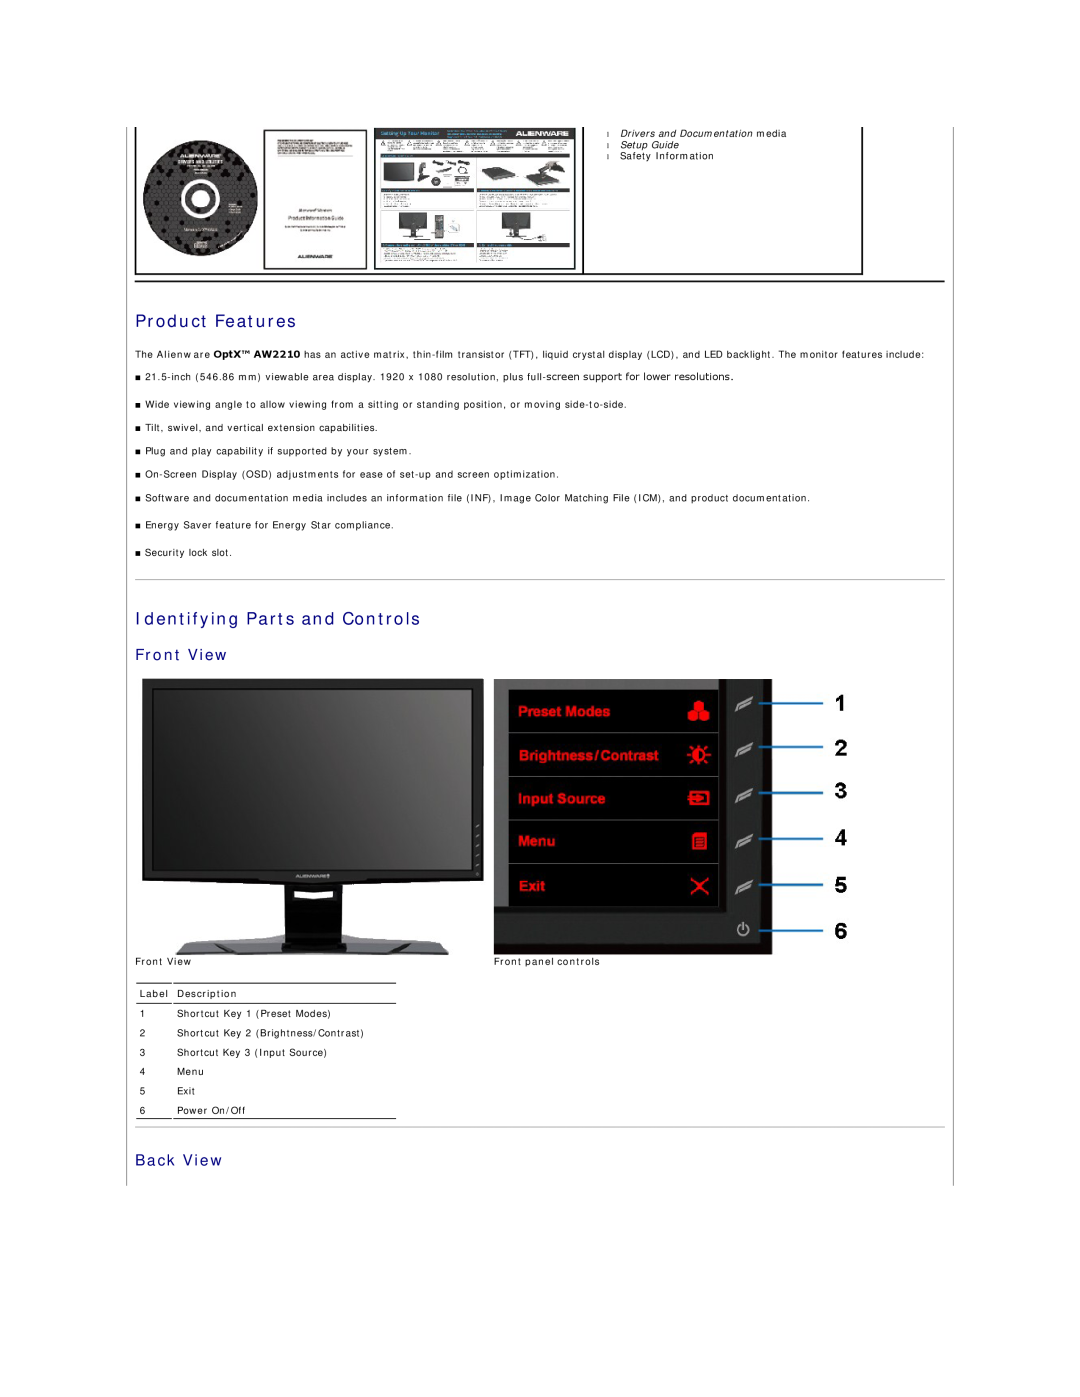 Dell AW2210T appendix Product Features, Identifying Parts and Controls, Front View, Back View 